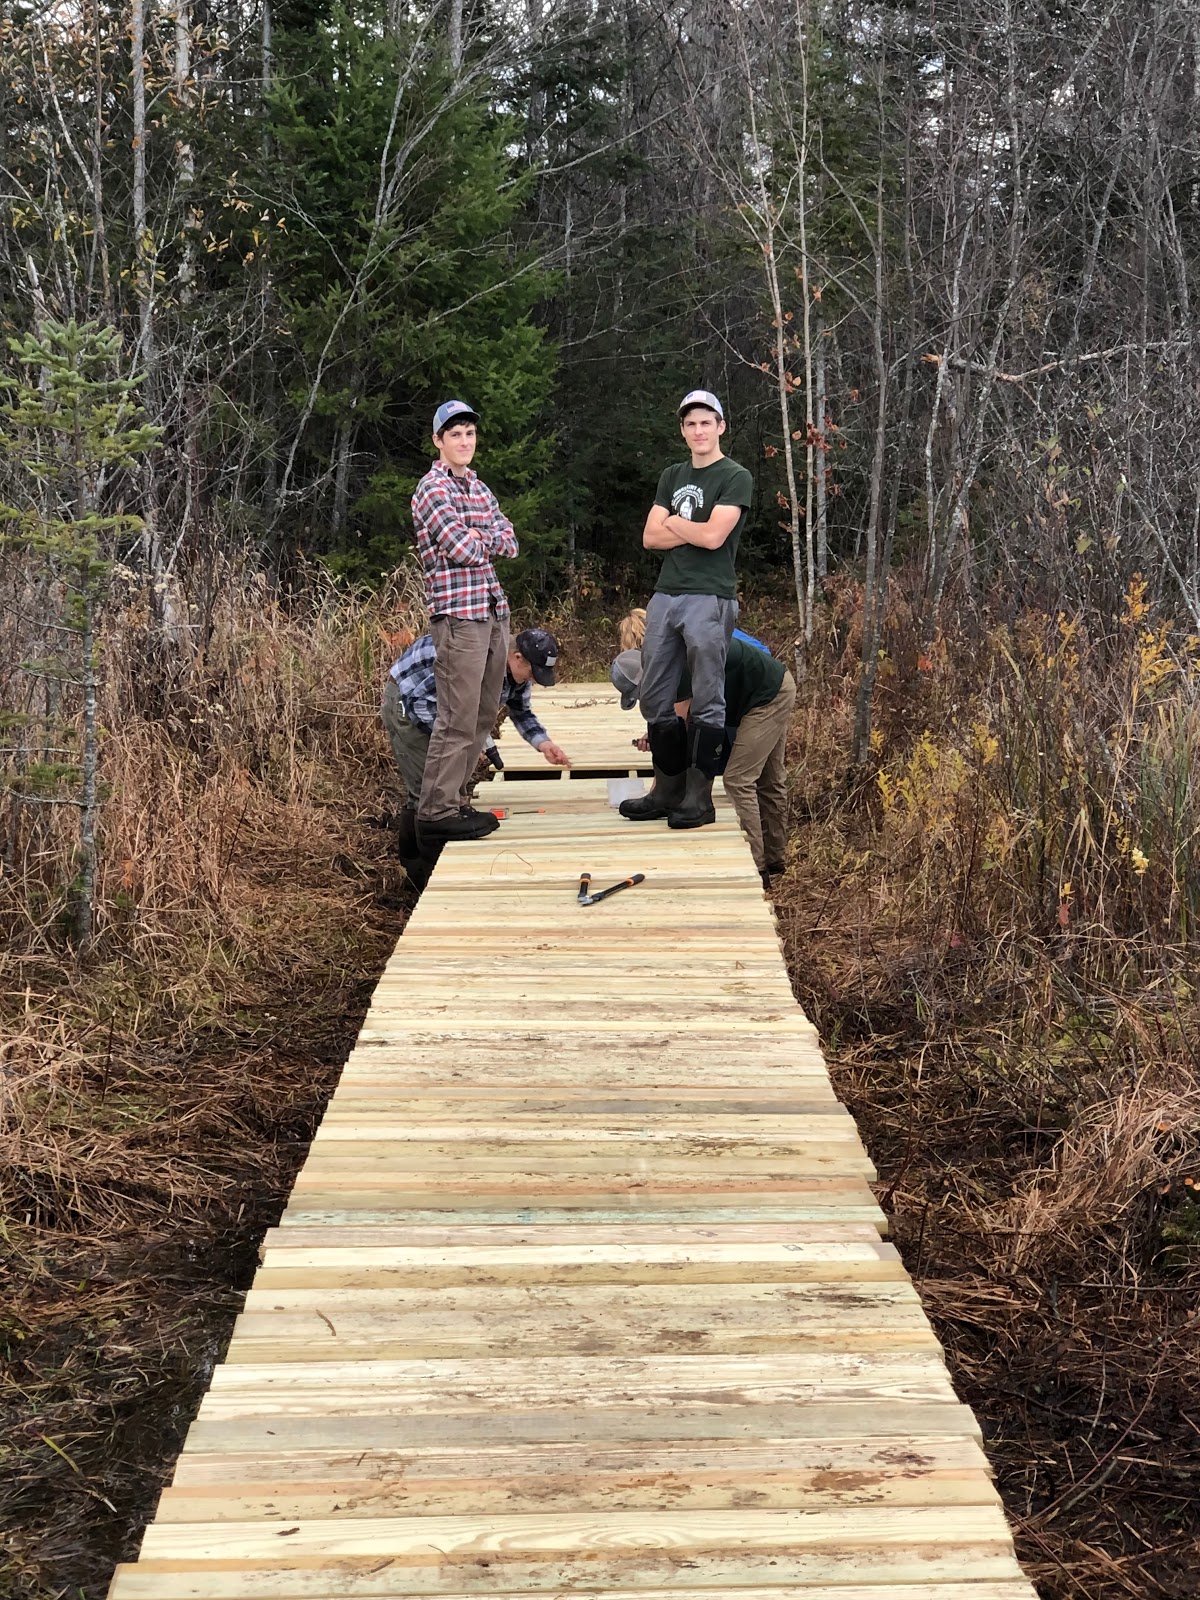 Students with handicapped accessible boardwalk